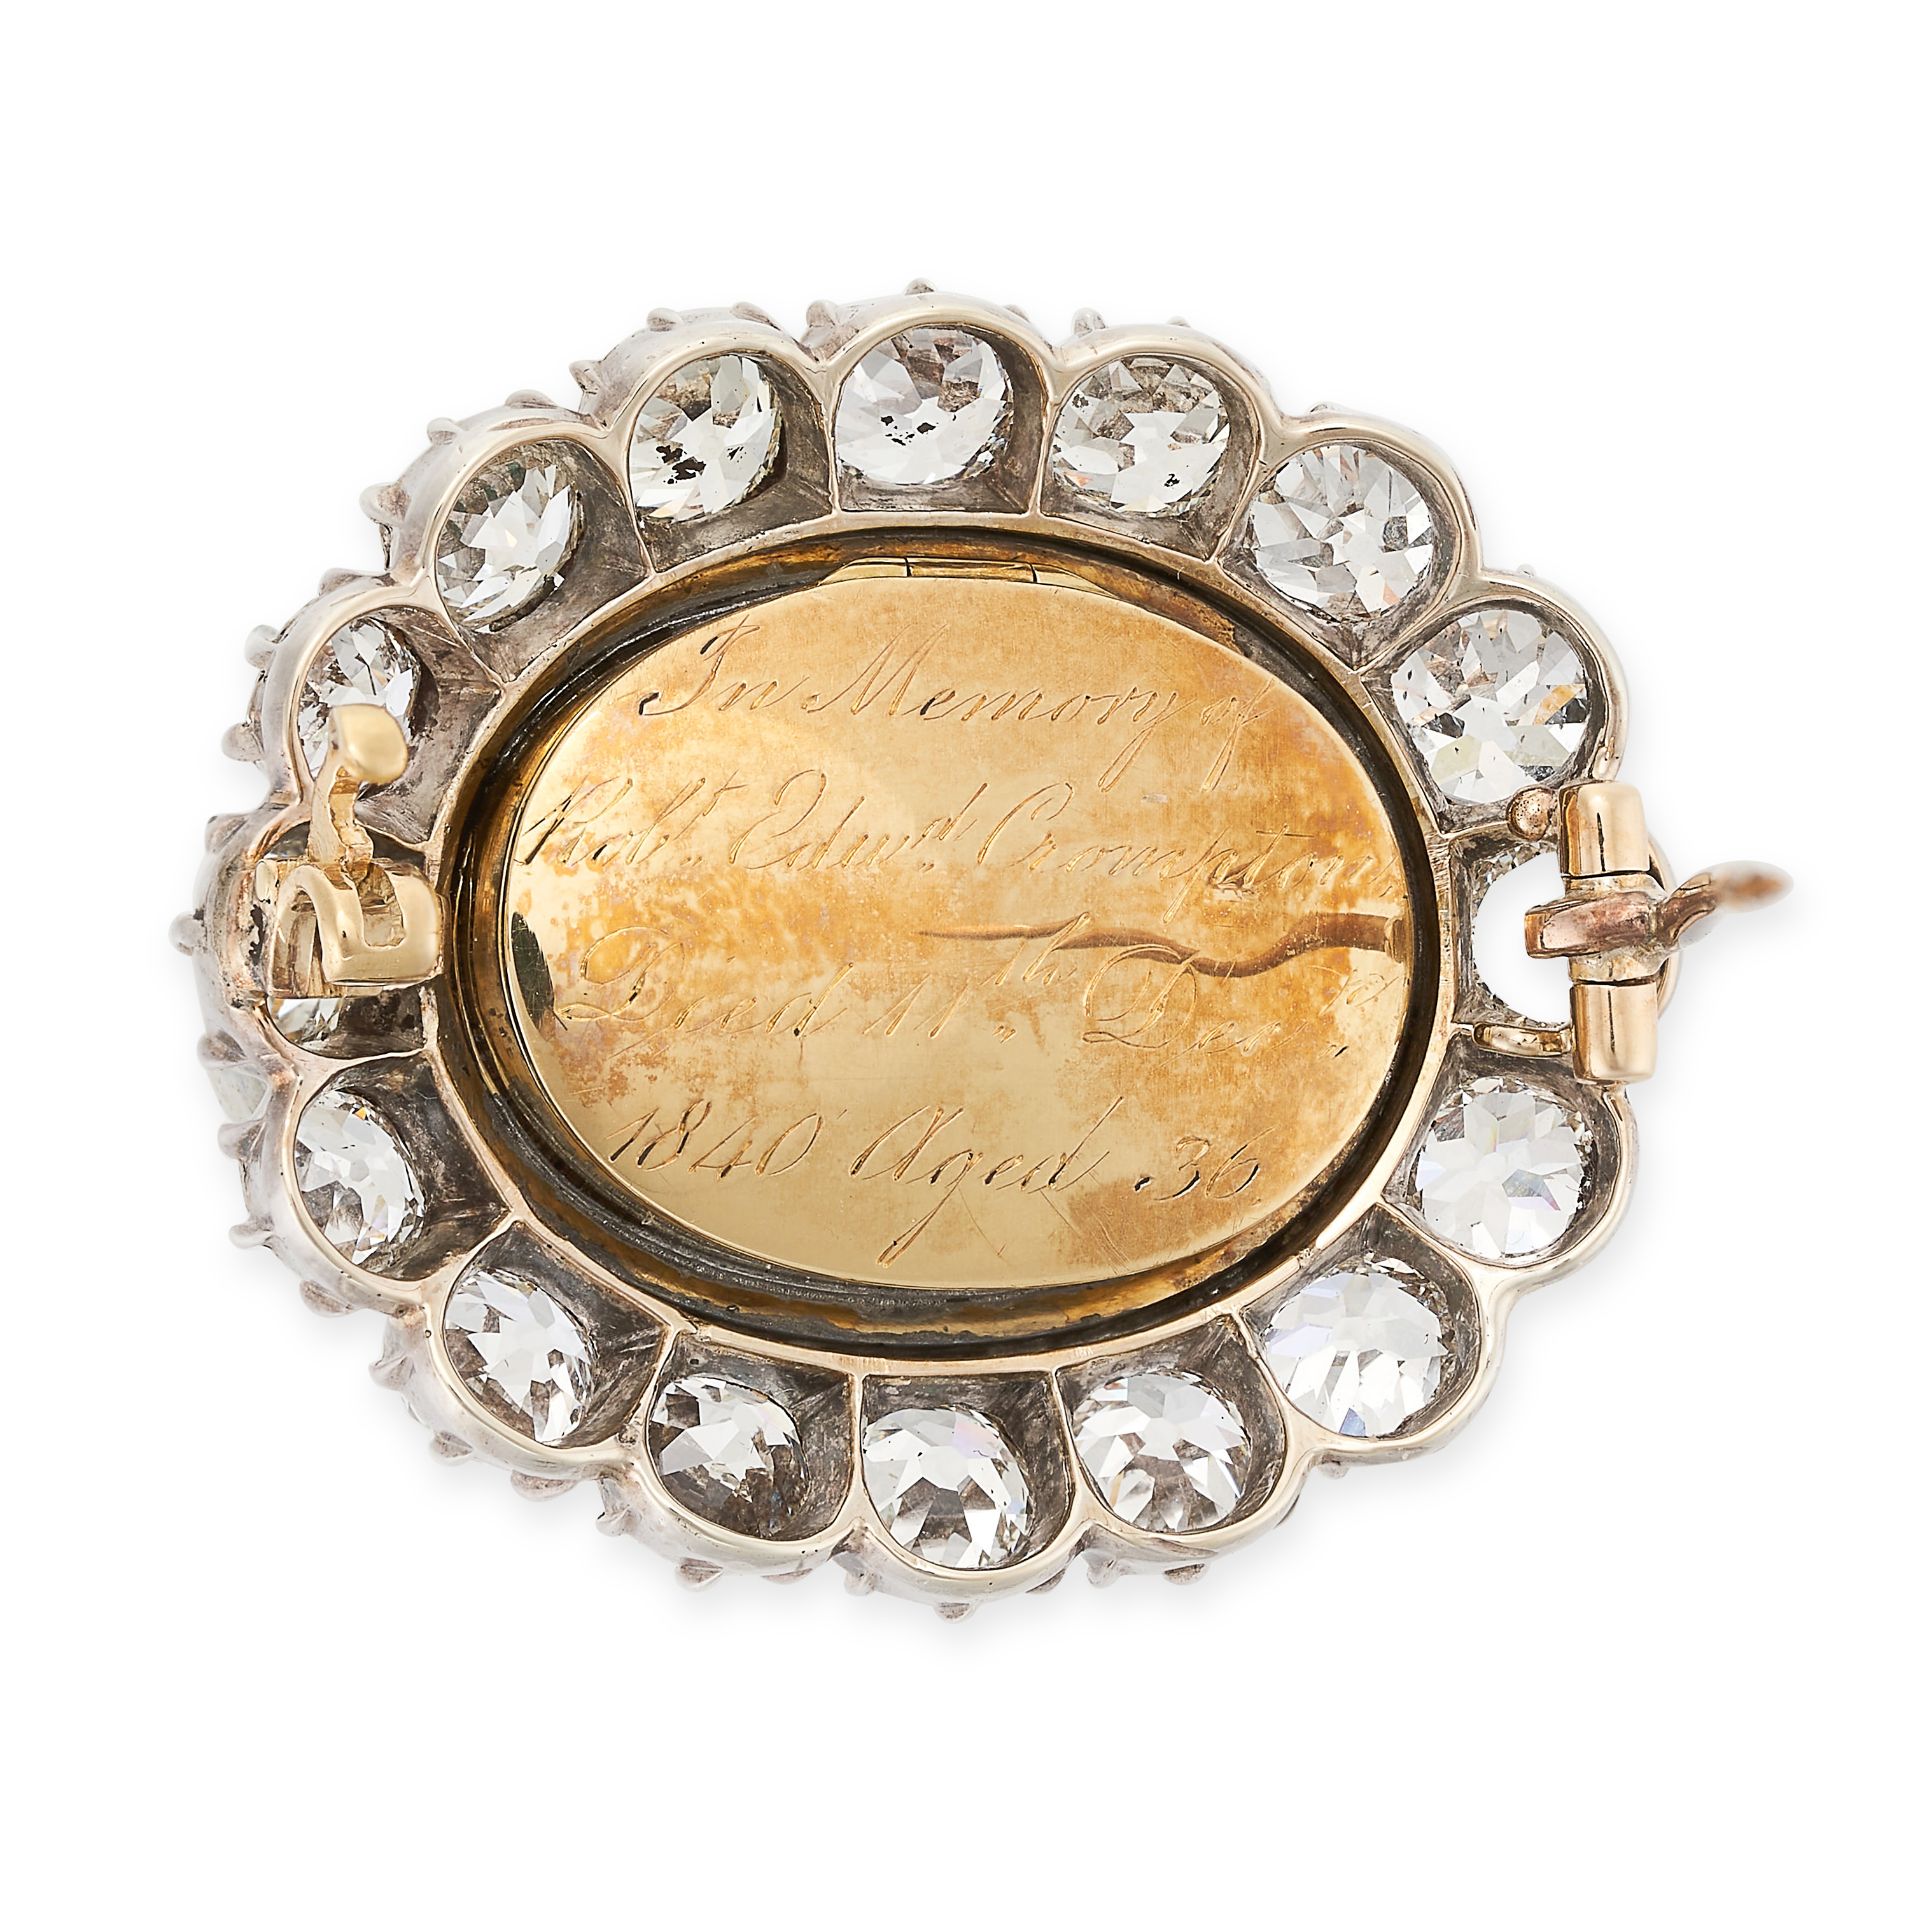 NO RESERVE - A FINE ANTIQUE VICTORIAN DIAMOND AND ENAMEL MOURNING LOCKET BROOCH, 19TH CENTURY in - Image 2 of 5